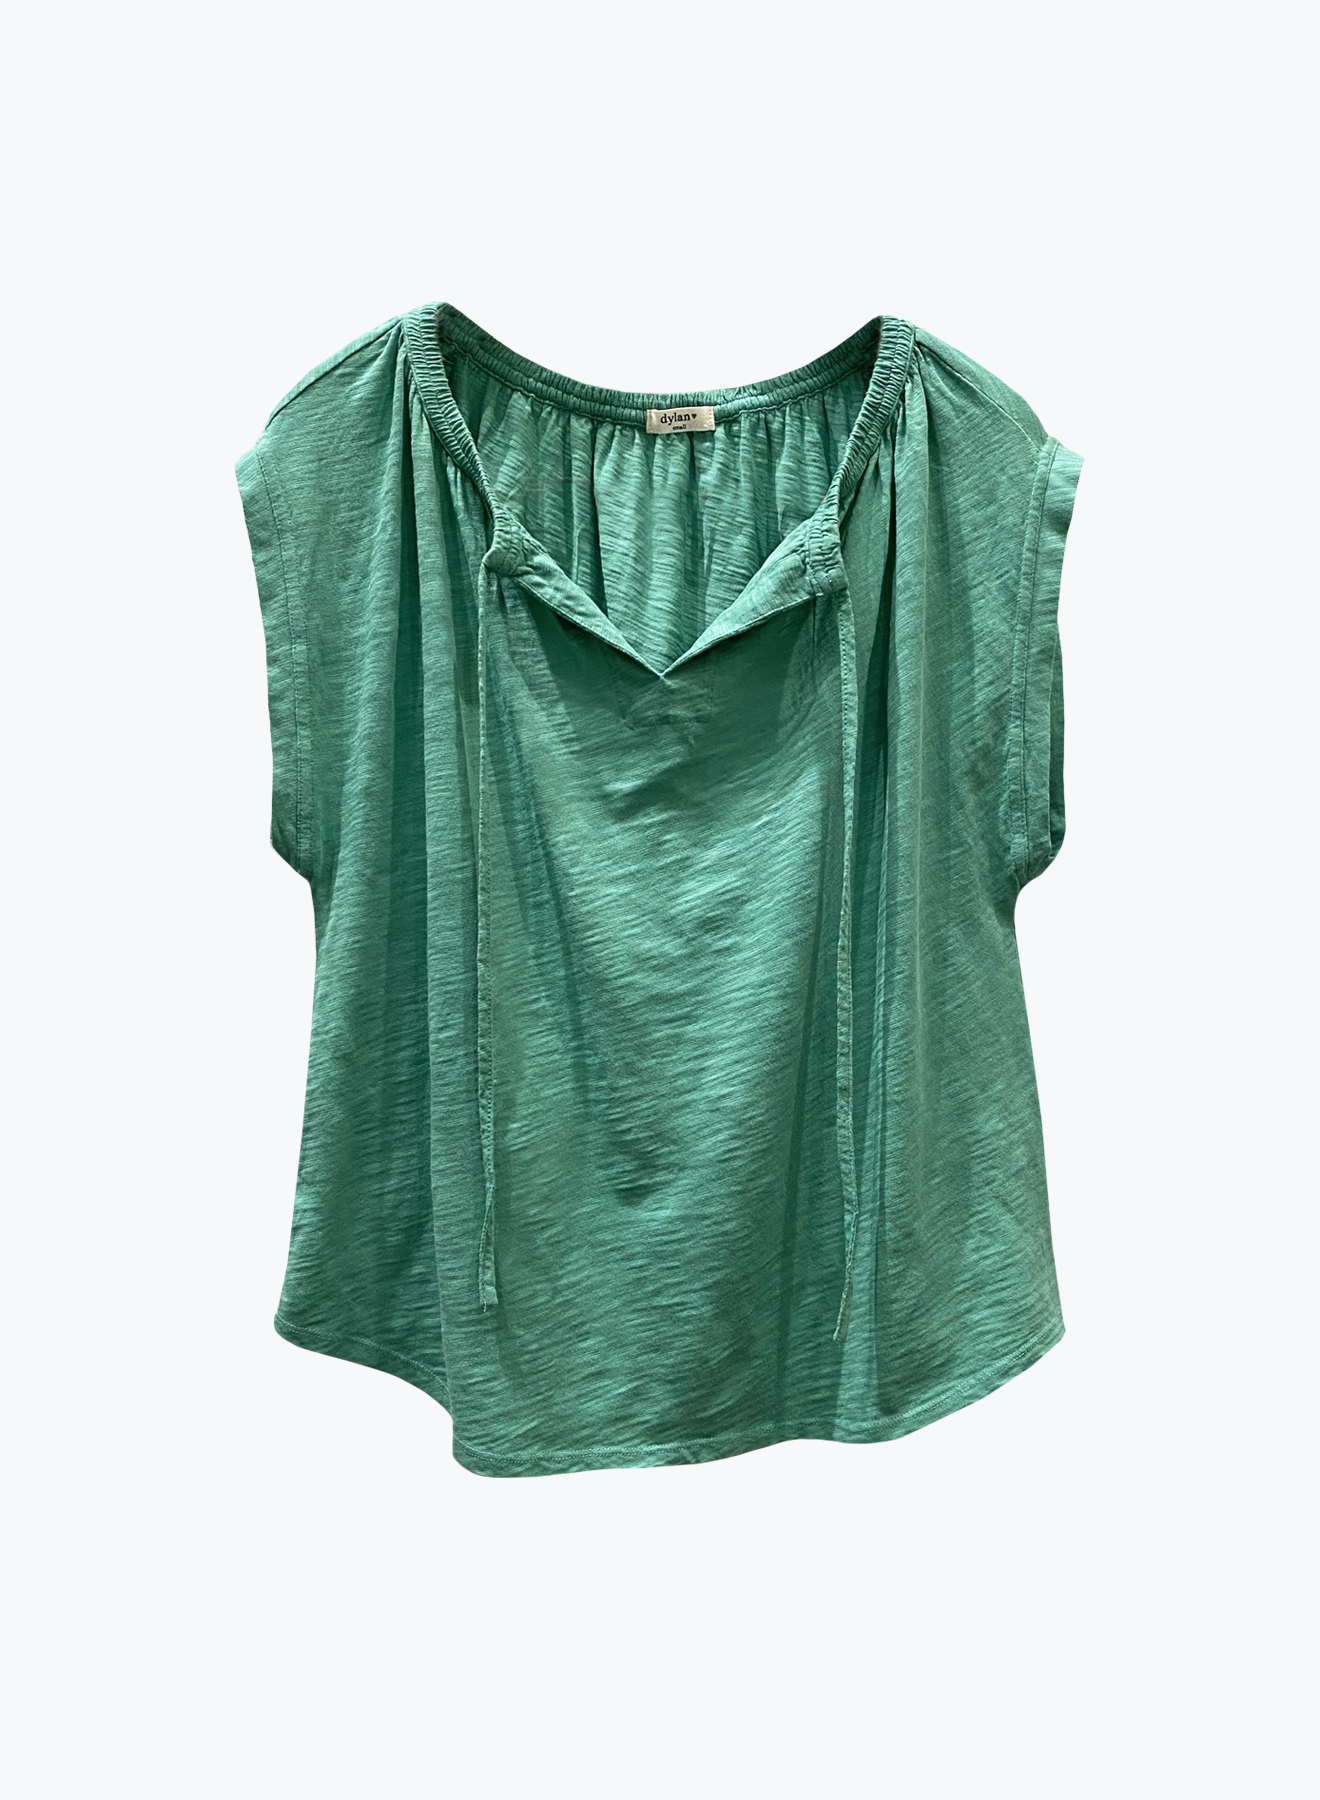 Gia Blouse in kale by Dylan